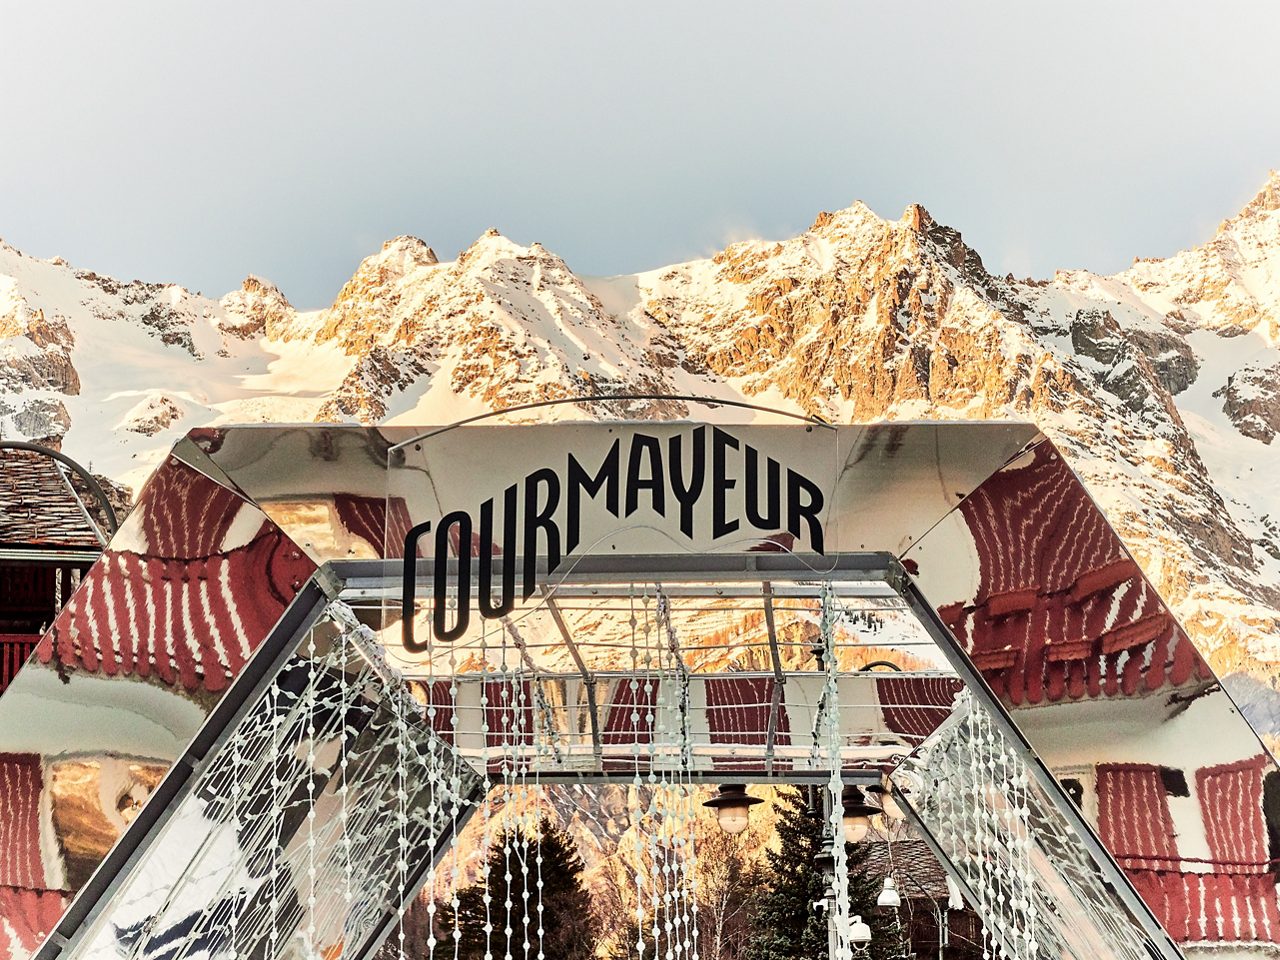 Courmayeur, Italy - January 18, 2020 Structure of mirrors in the square of Courmayeur indicating the arrival in the village with the background of the snowy mountains of the Aosta Valley in Italy